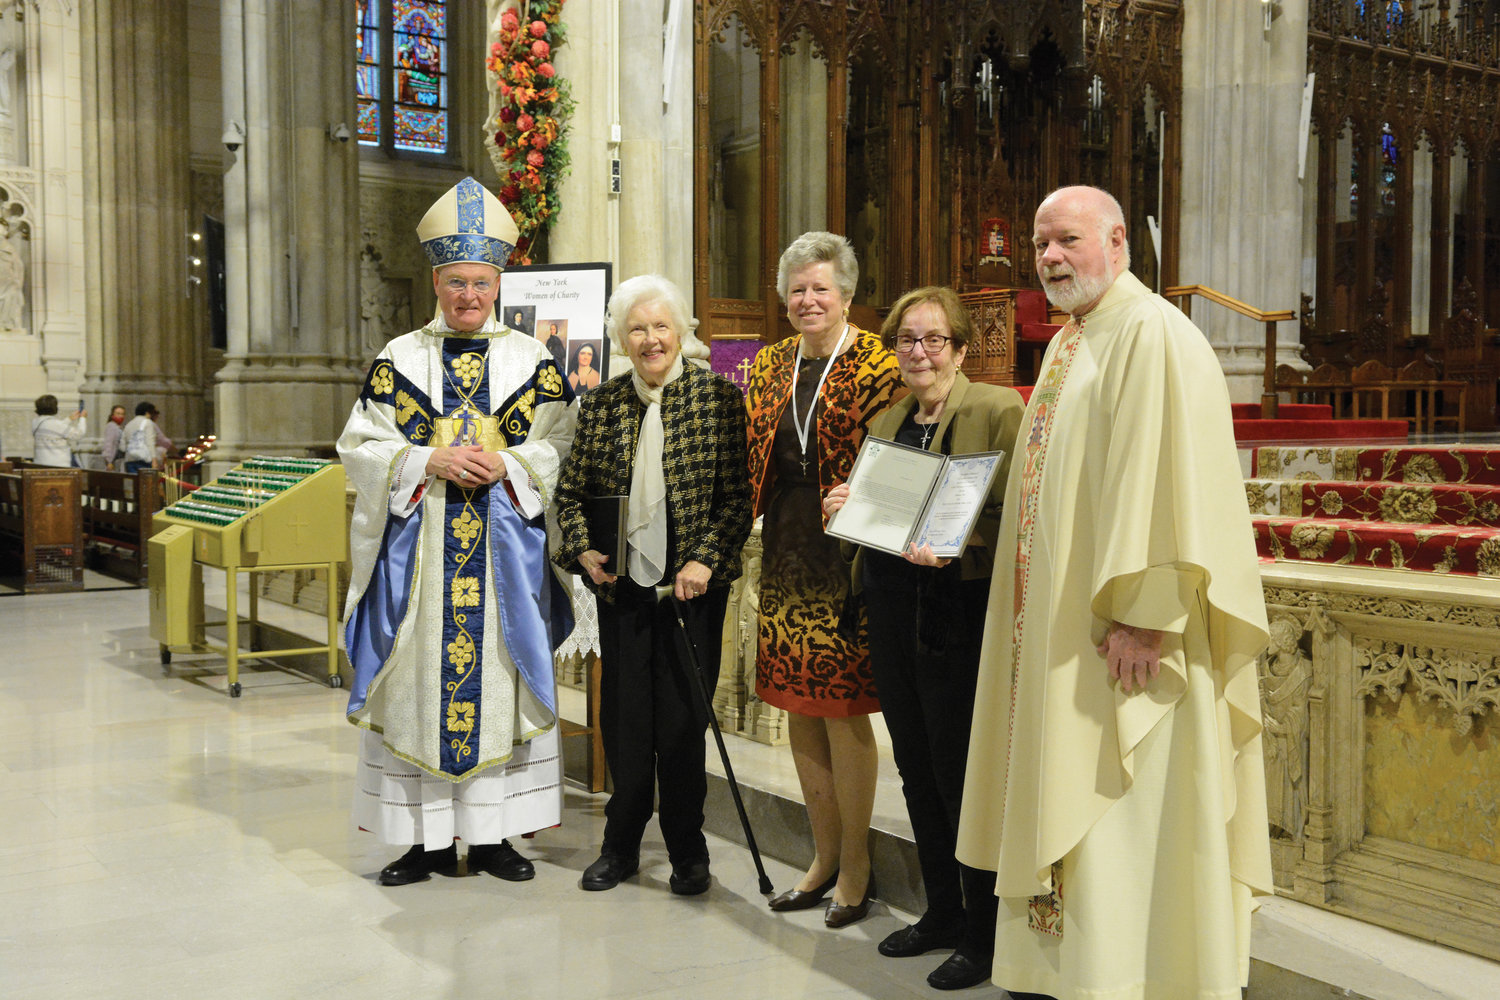 Recipients of the St. Louise de Marillac Award are Anne Martyn, with white scarf to the right of Bishop Whalen and Barbara Neus, with glasses to the left of Msgr. Kevin Sullivan, executive director of archdiocesan Catholic Charities. Mary Buckley Teatum, president of Ladies of Charity, is at center.